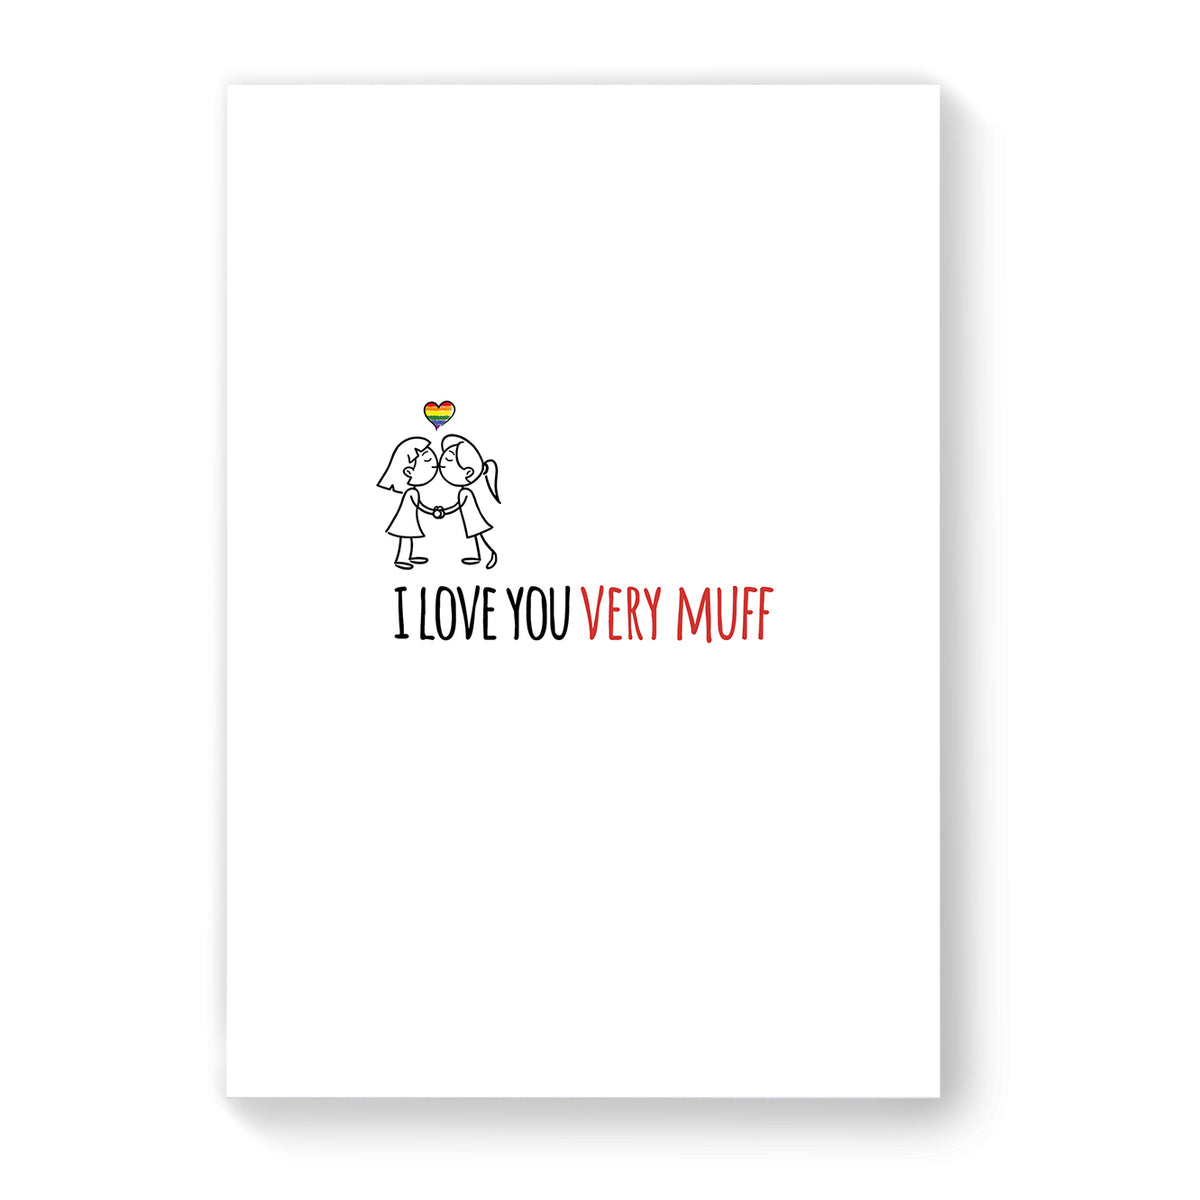 I love you very muff - Lesbian Gay Couple Card - White Simple | Gift